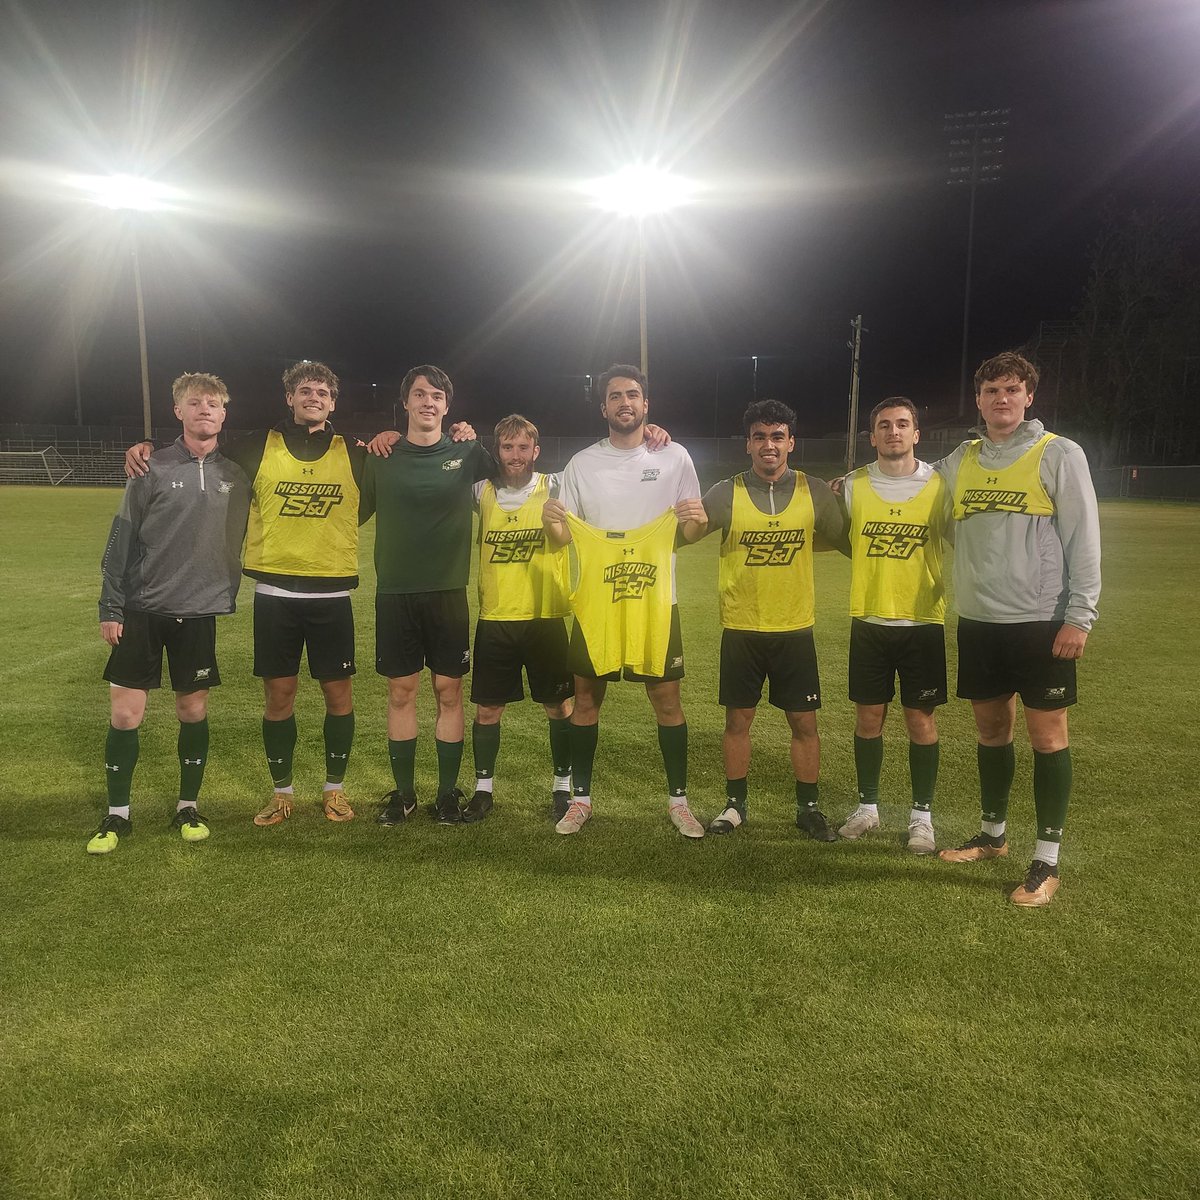 Tonight's Monday Twitter Winners.  Good start to last week of Spring soccer. It ends Saturday with game and Alumni game. #minerpride #itsaWEthing